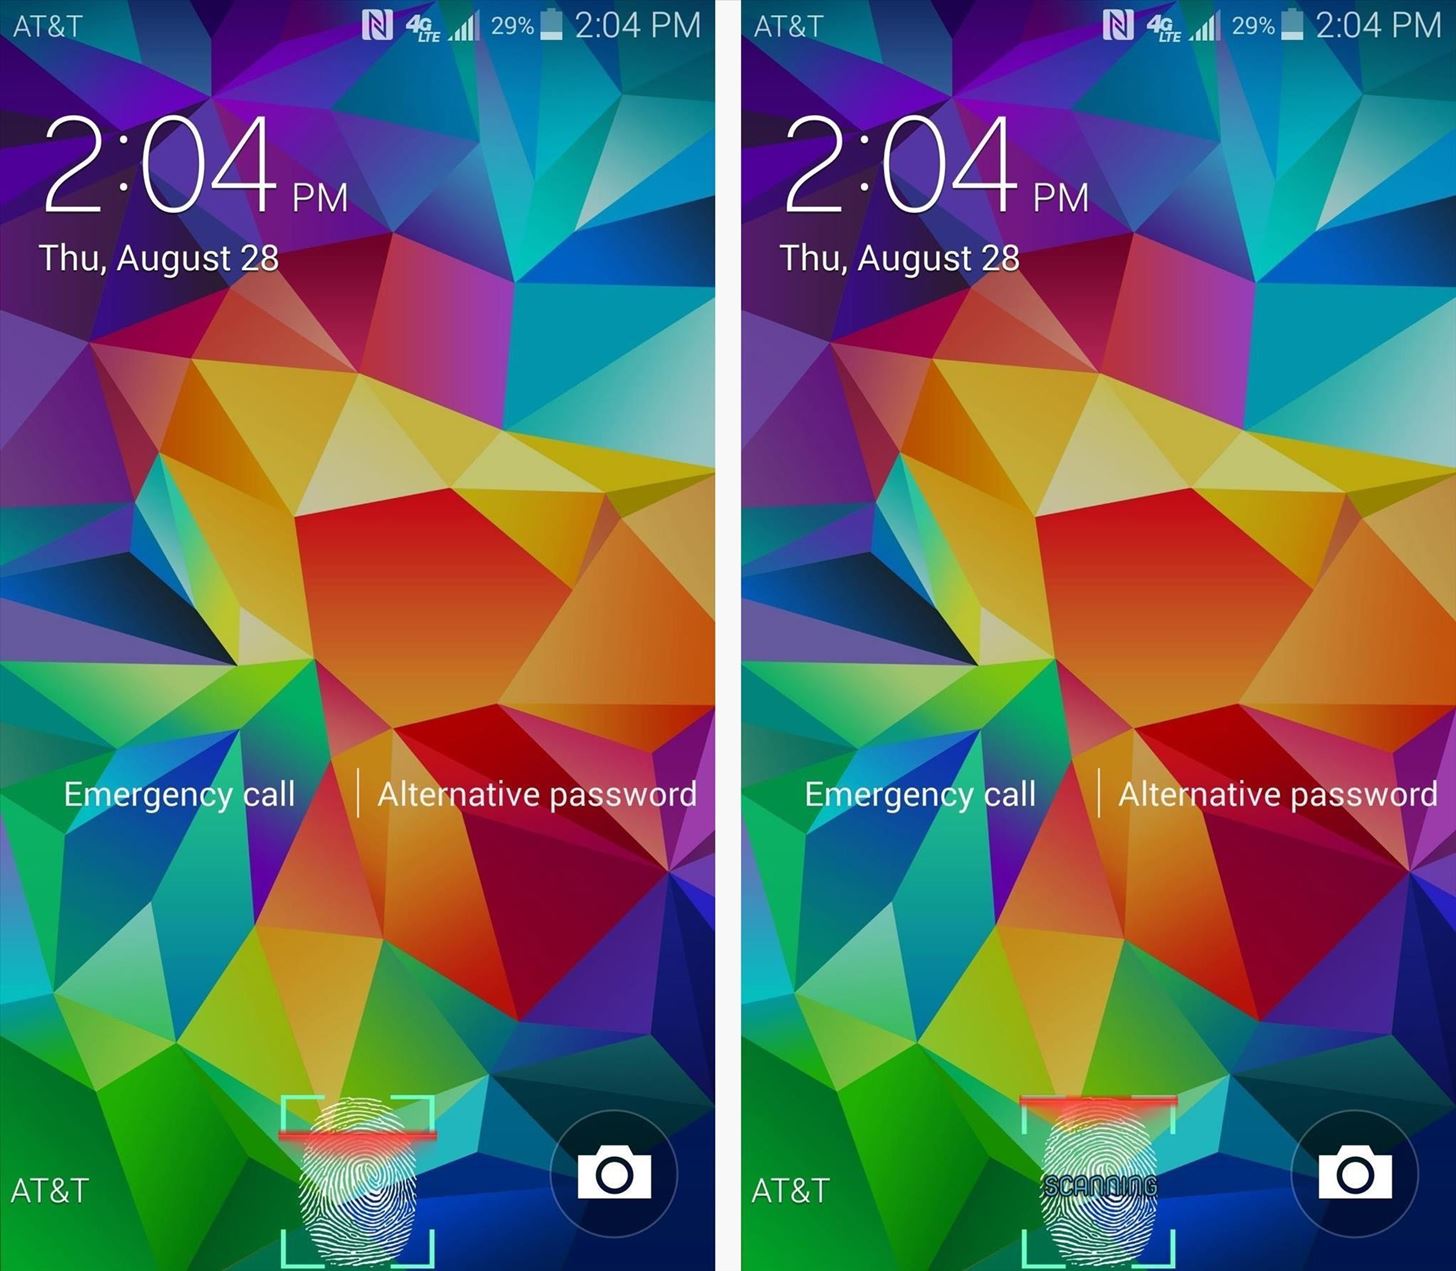 Theme the Fingerprint Scanner on Your Galaxy S5